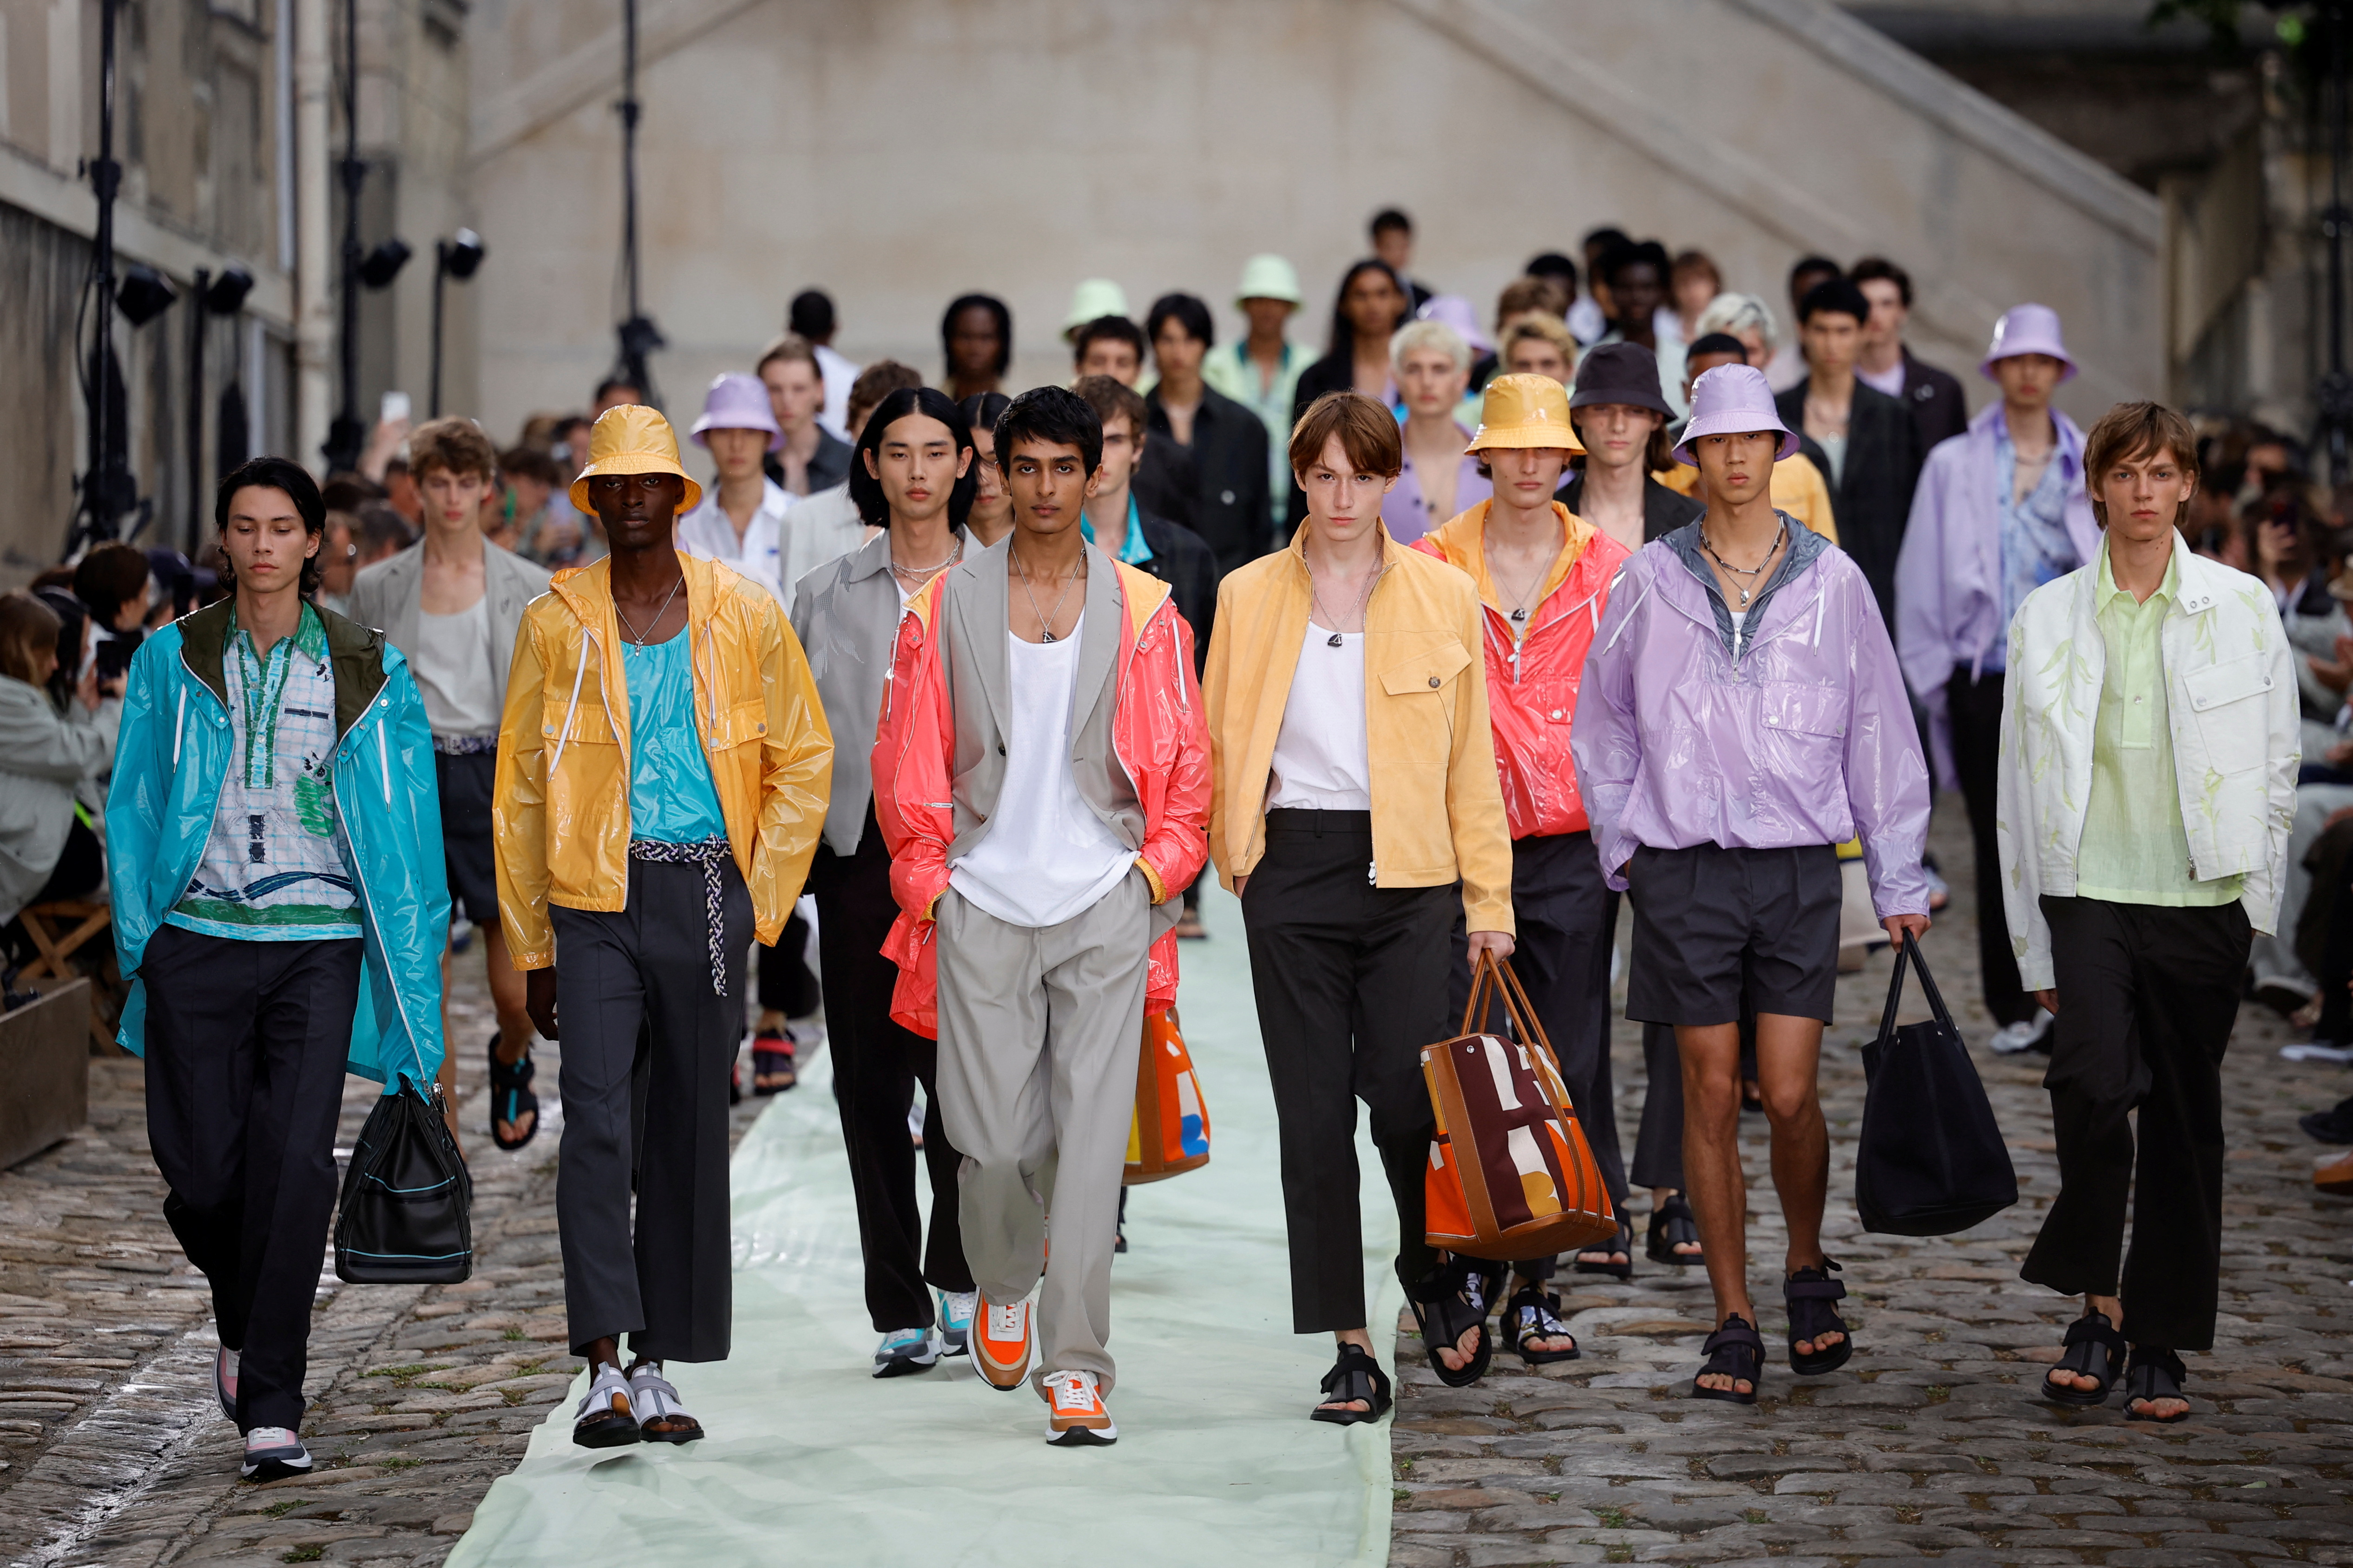 Hermes collection show during Men's Fashion Week in Paris